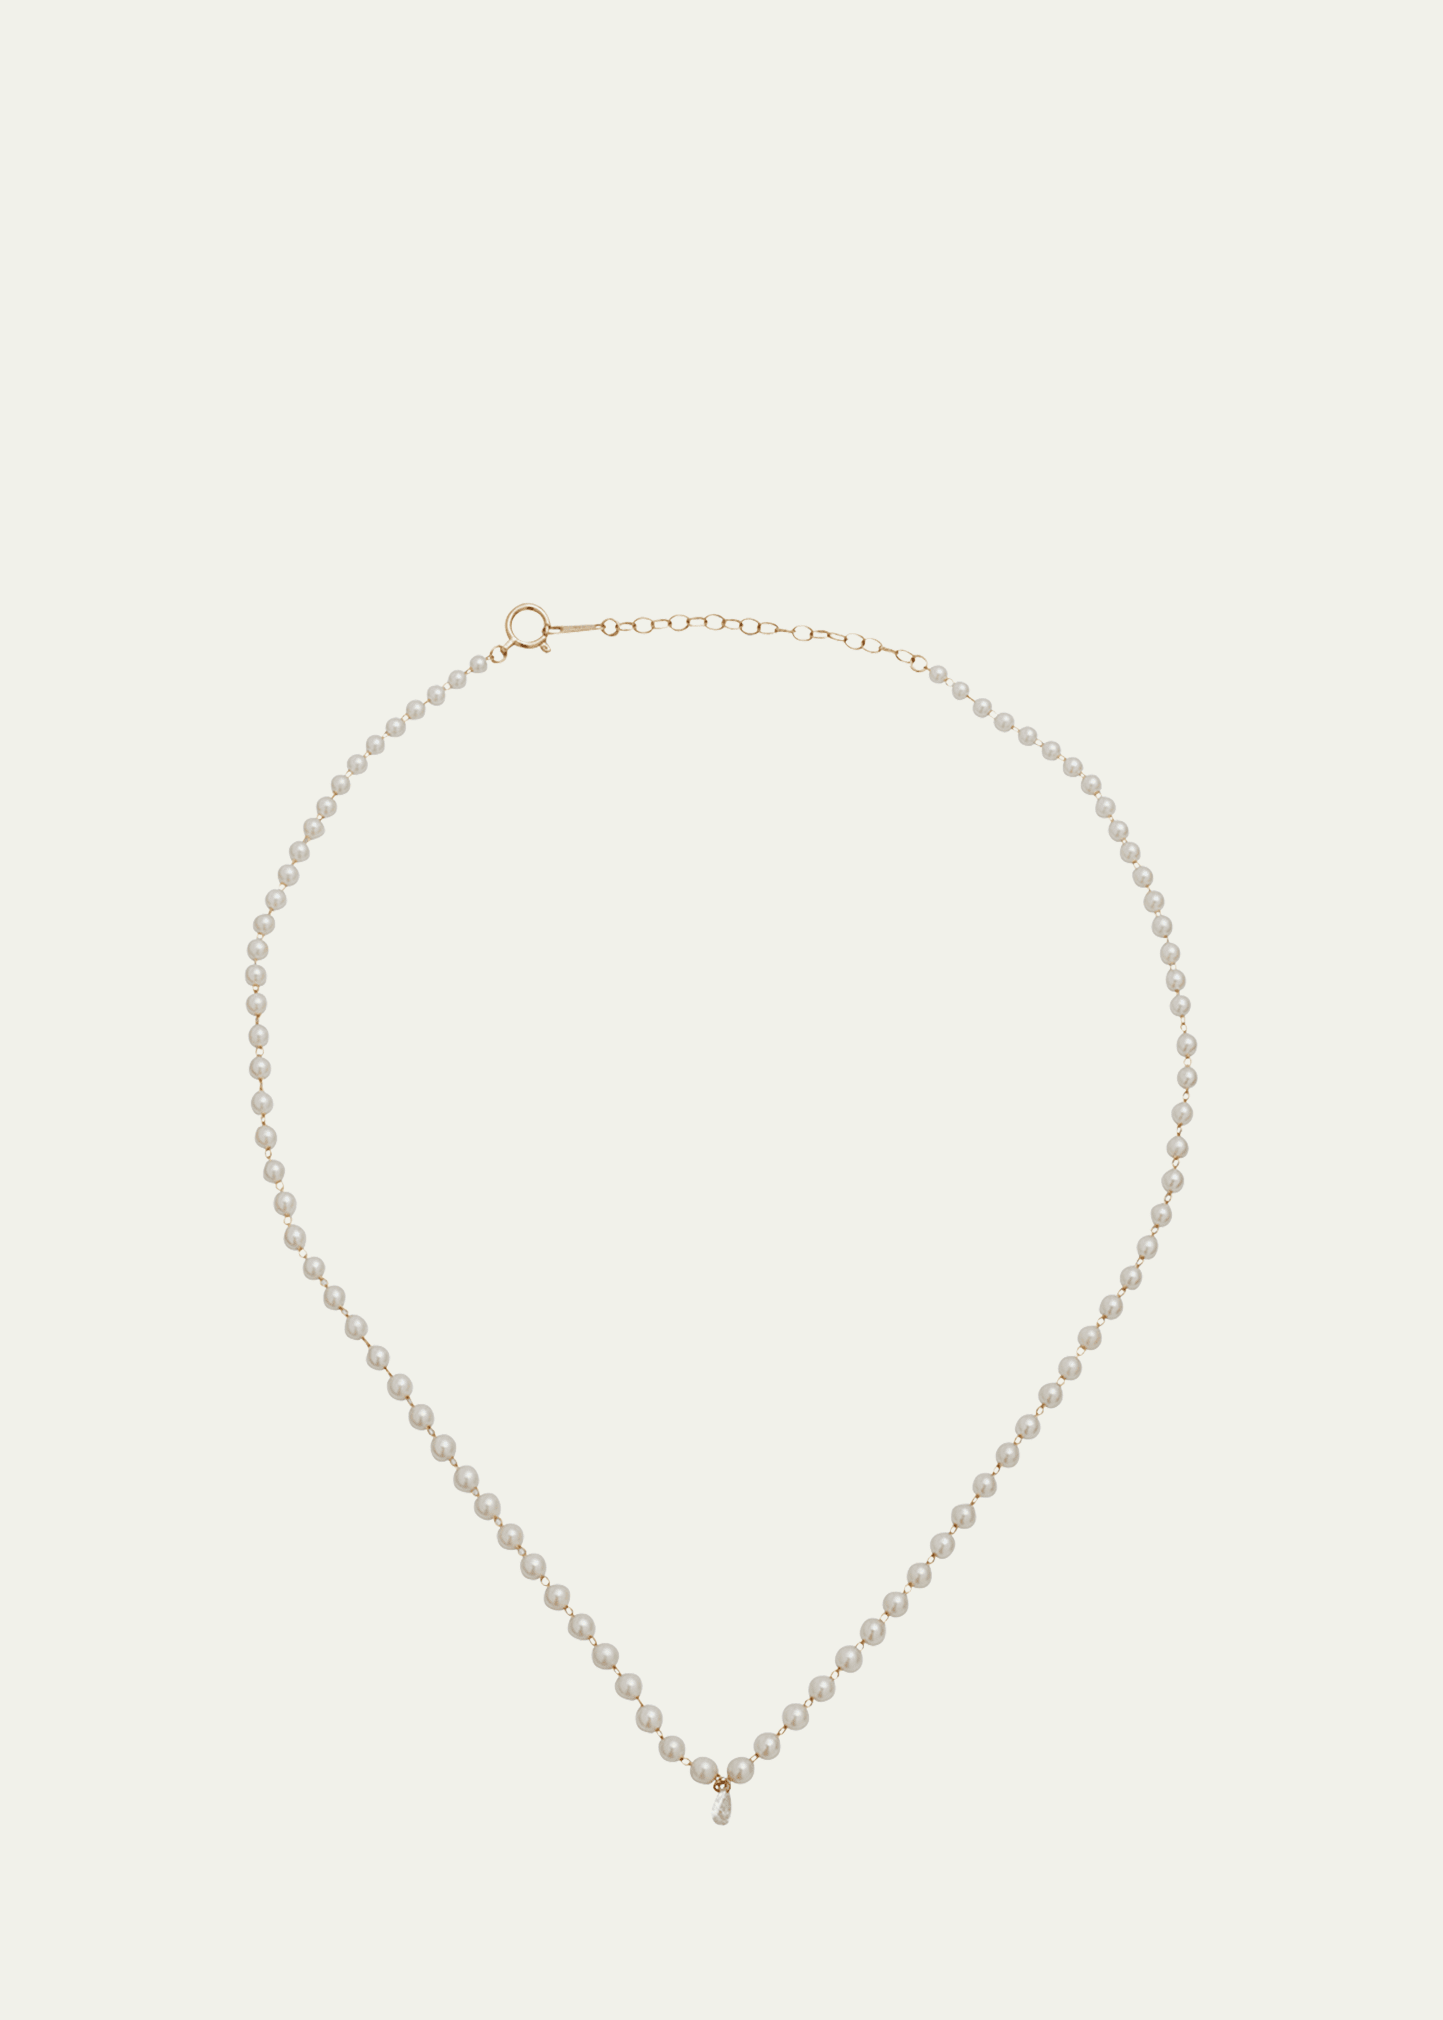 Akoya Pearl Necklace with Pear Diamond